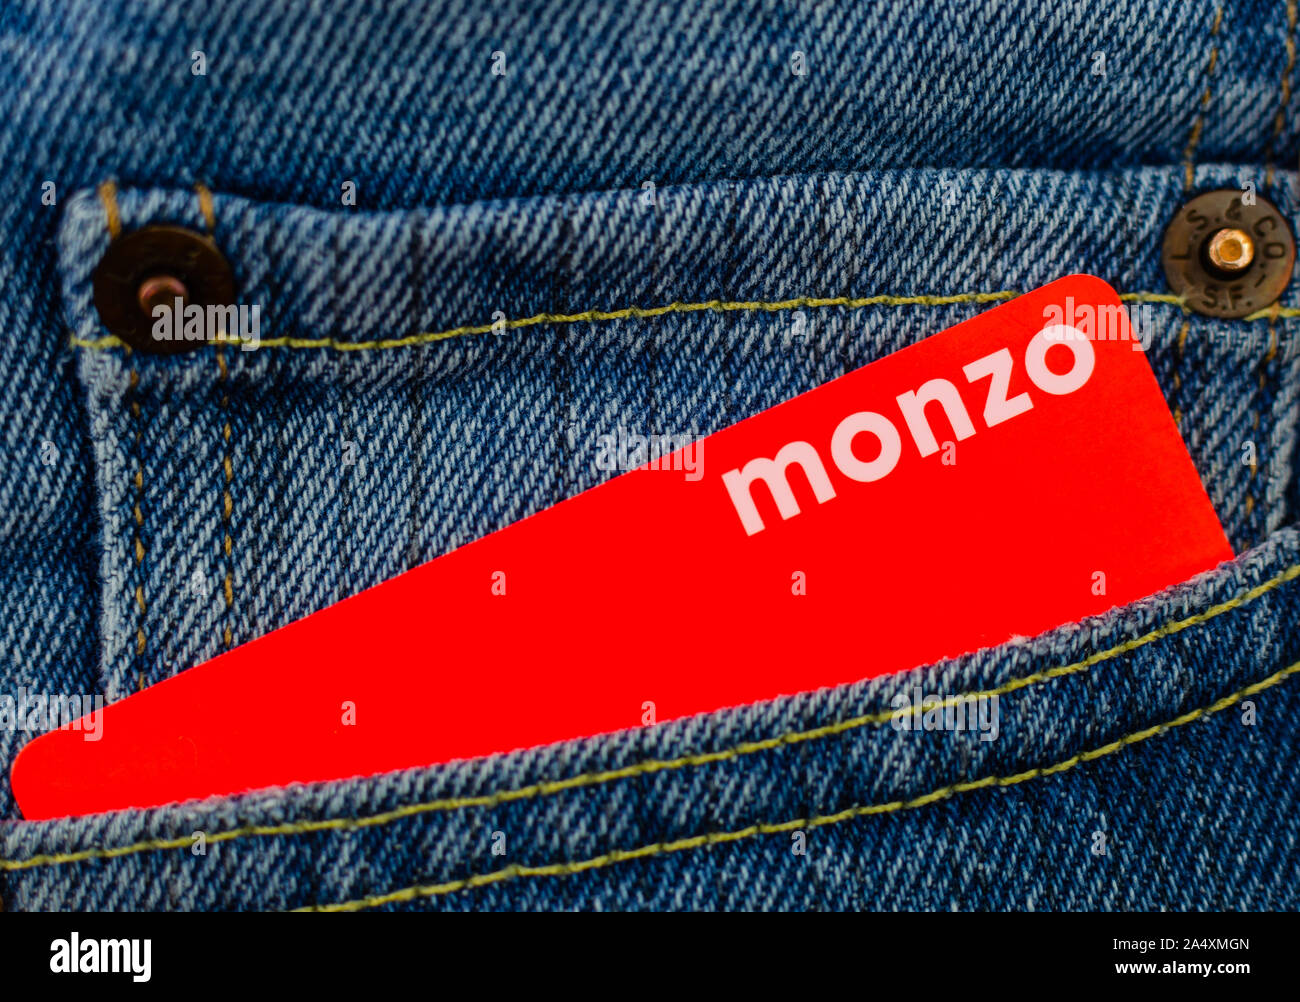 Monzo bank card sticking from the jeans pocket. Close up photo. Stock Photo